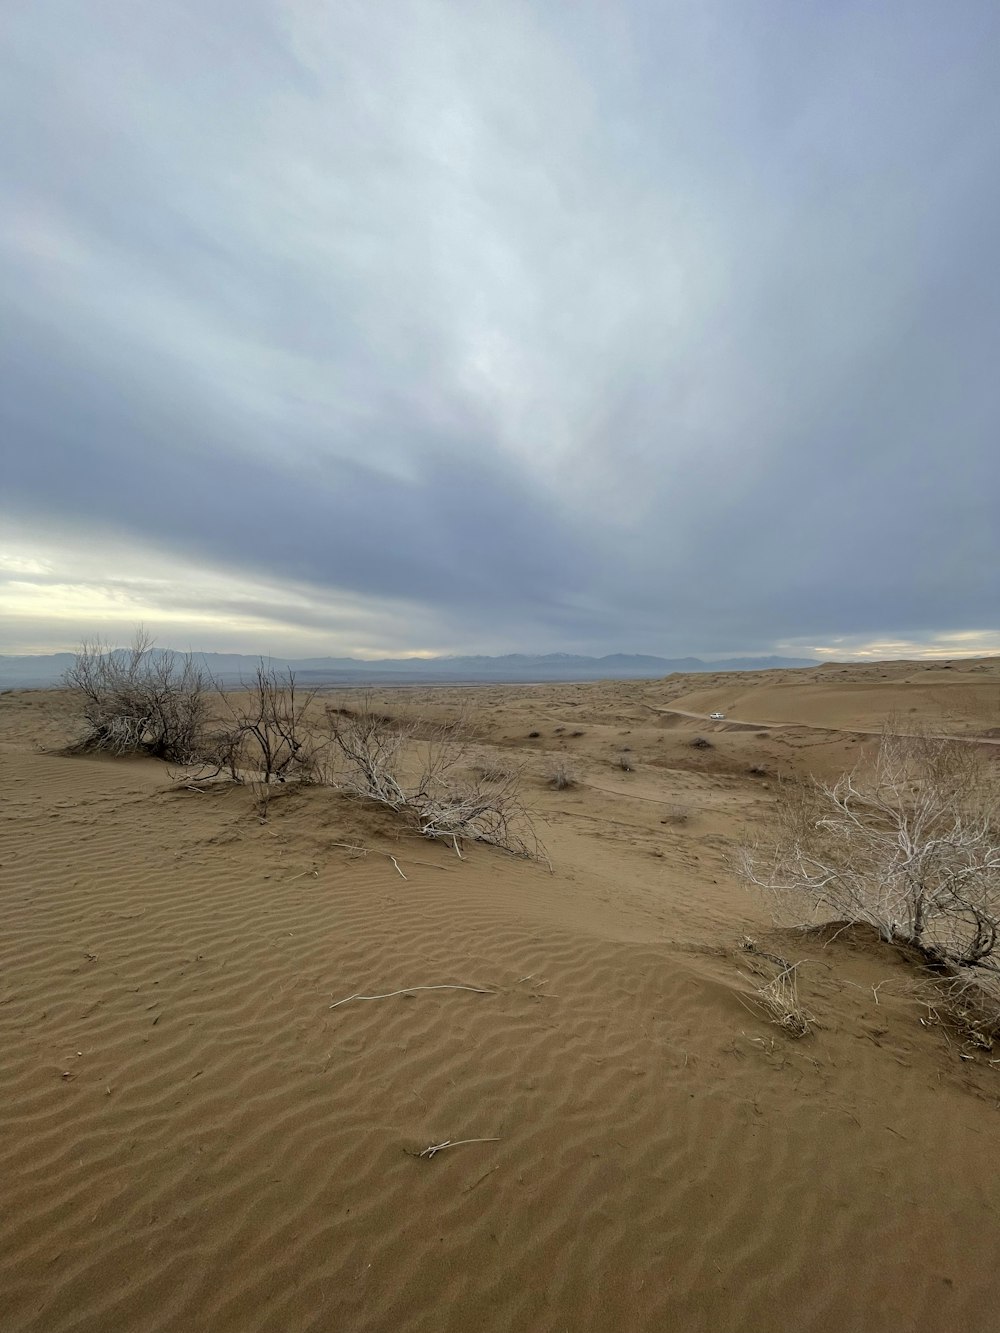 a desert landscape with sparse trees and a cloudy sky